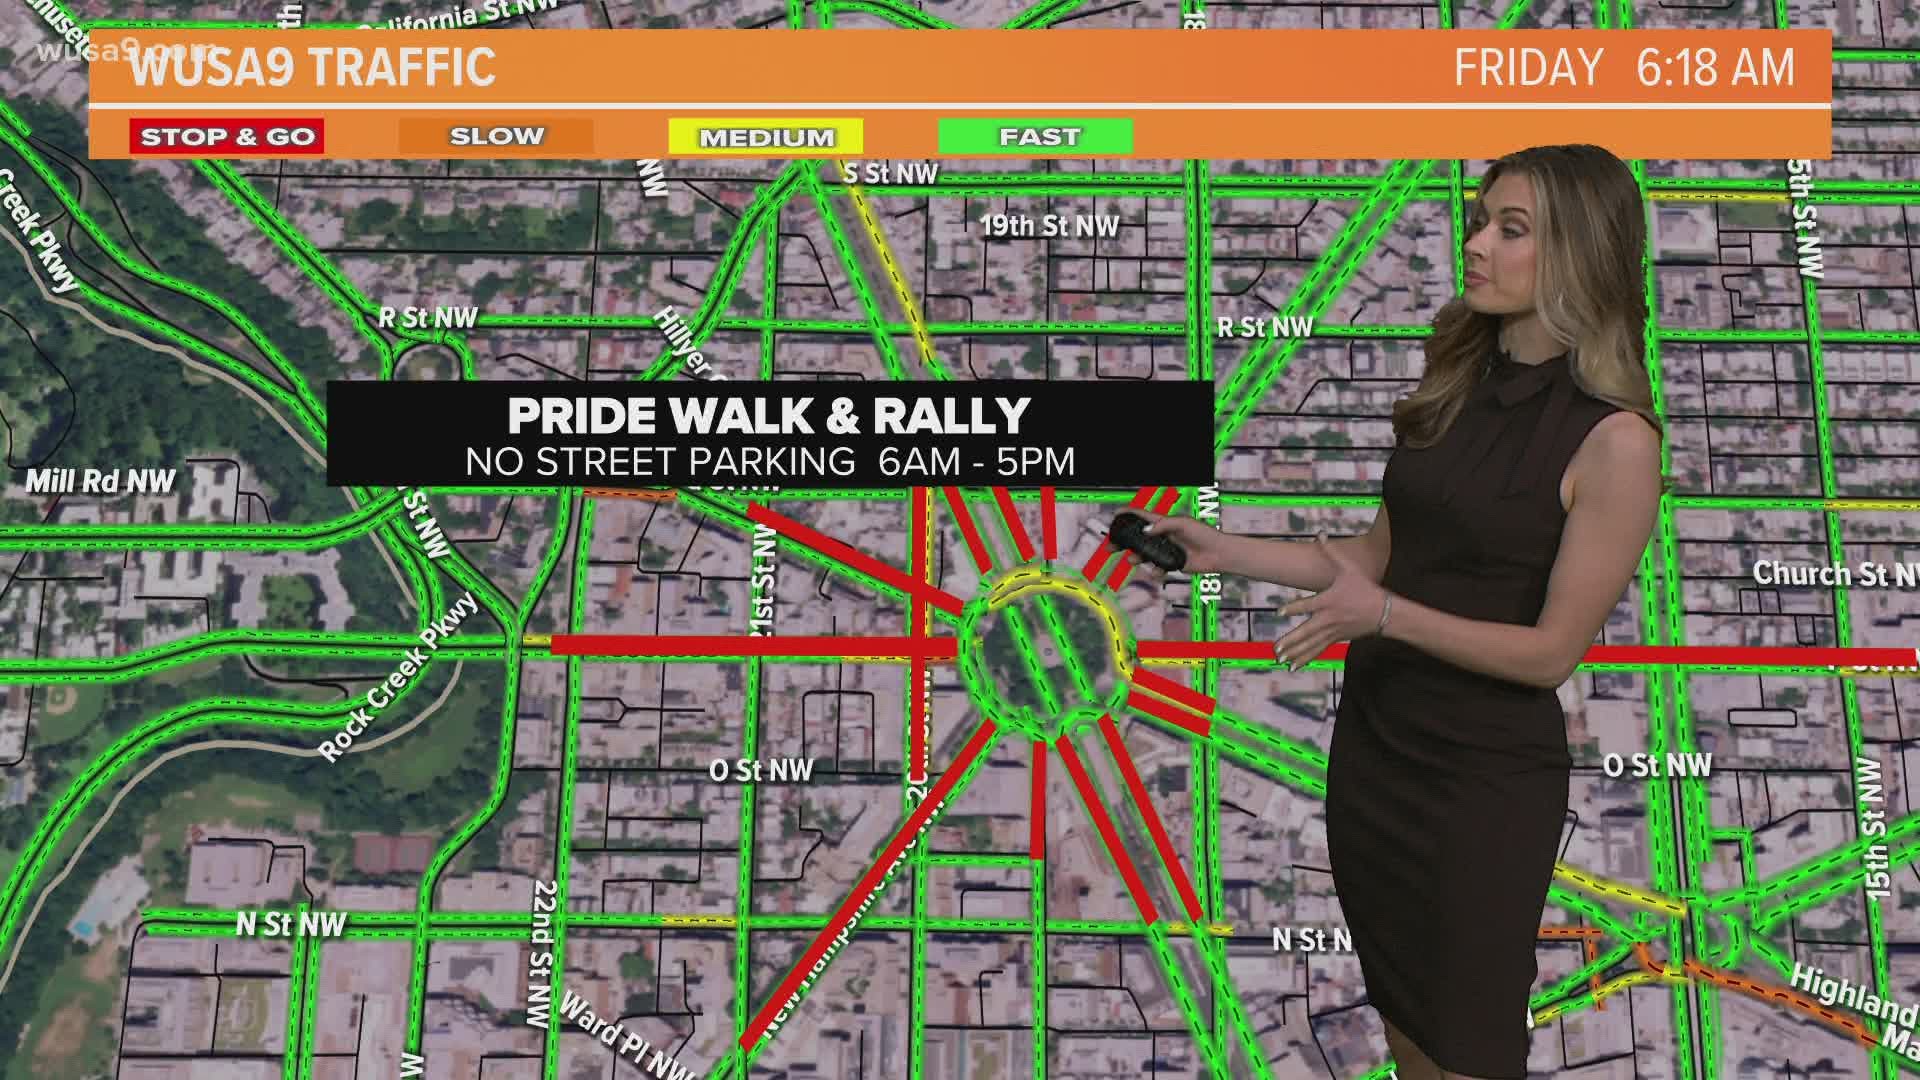 Here's a look at what roads will be closed for DC's Pride Walk and Rally on Saturday.